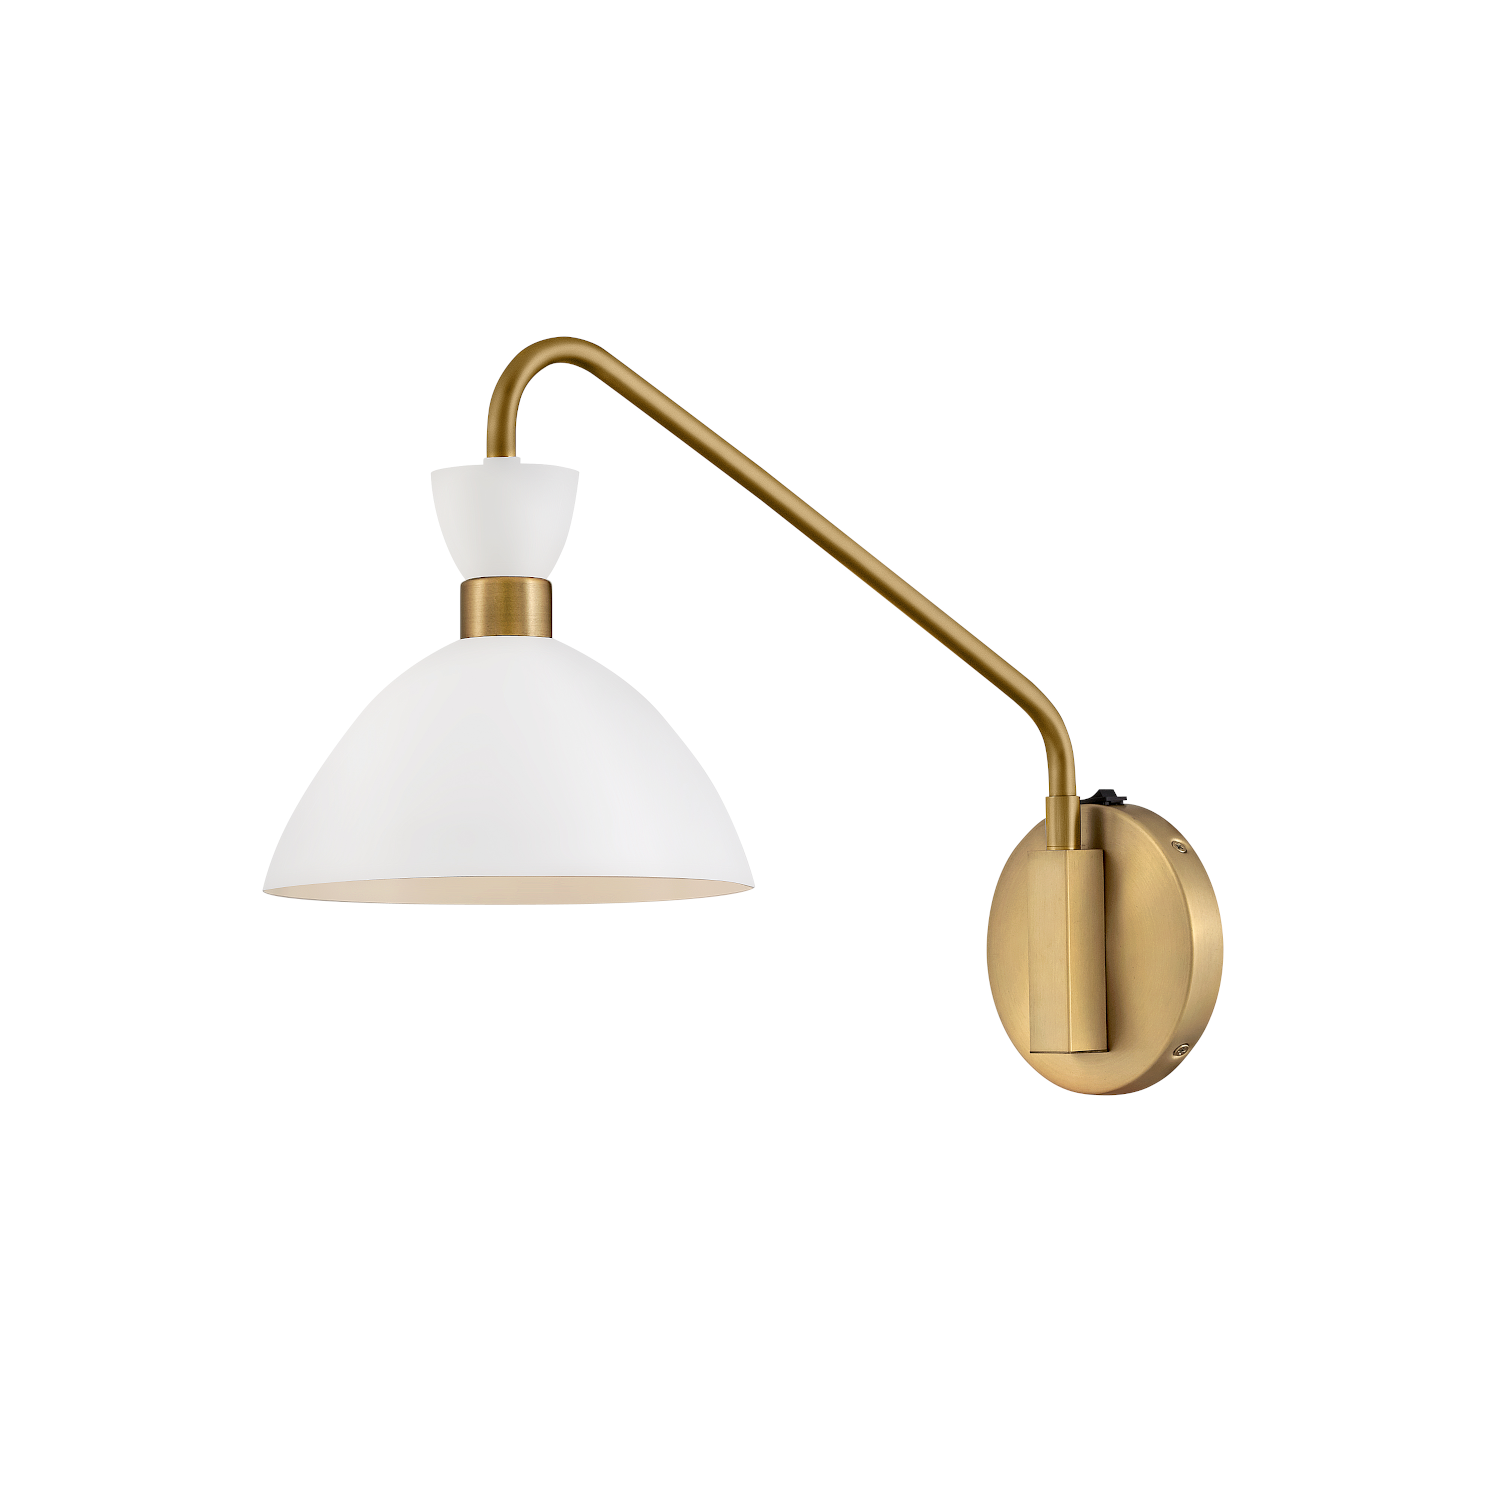 https://thelightingcentre.co.nz/wp-content/uploads/2023/08/83250mw-hb-Simon-Brass-Reading-light-with-white-shade-1.png